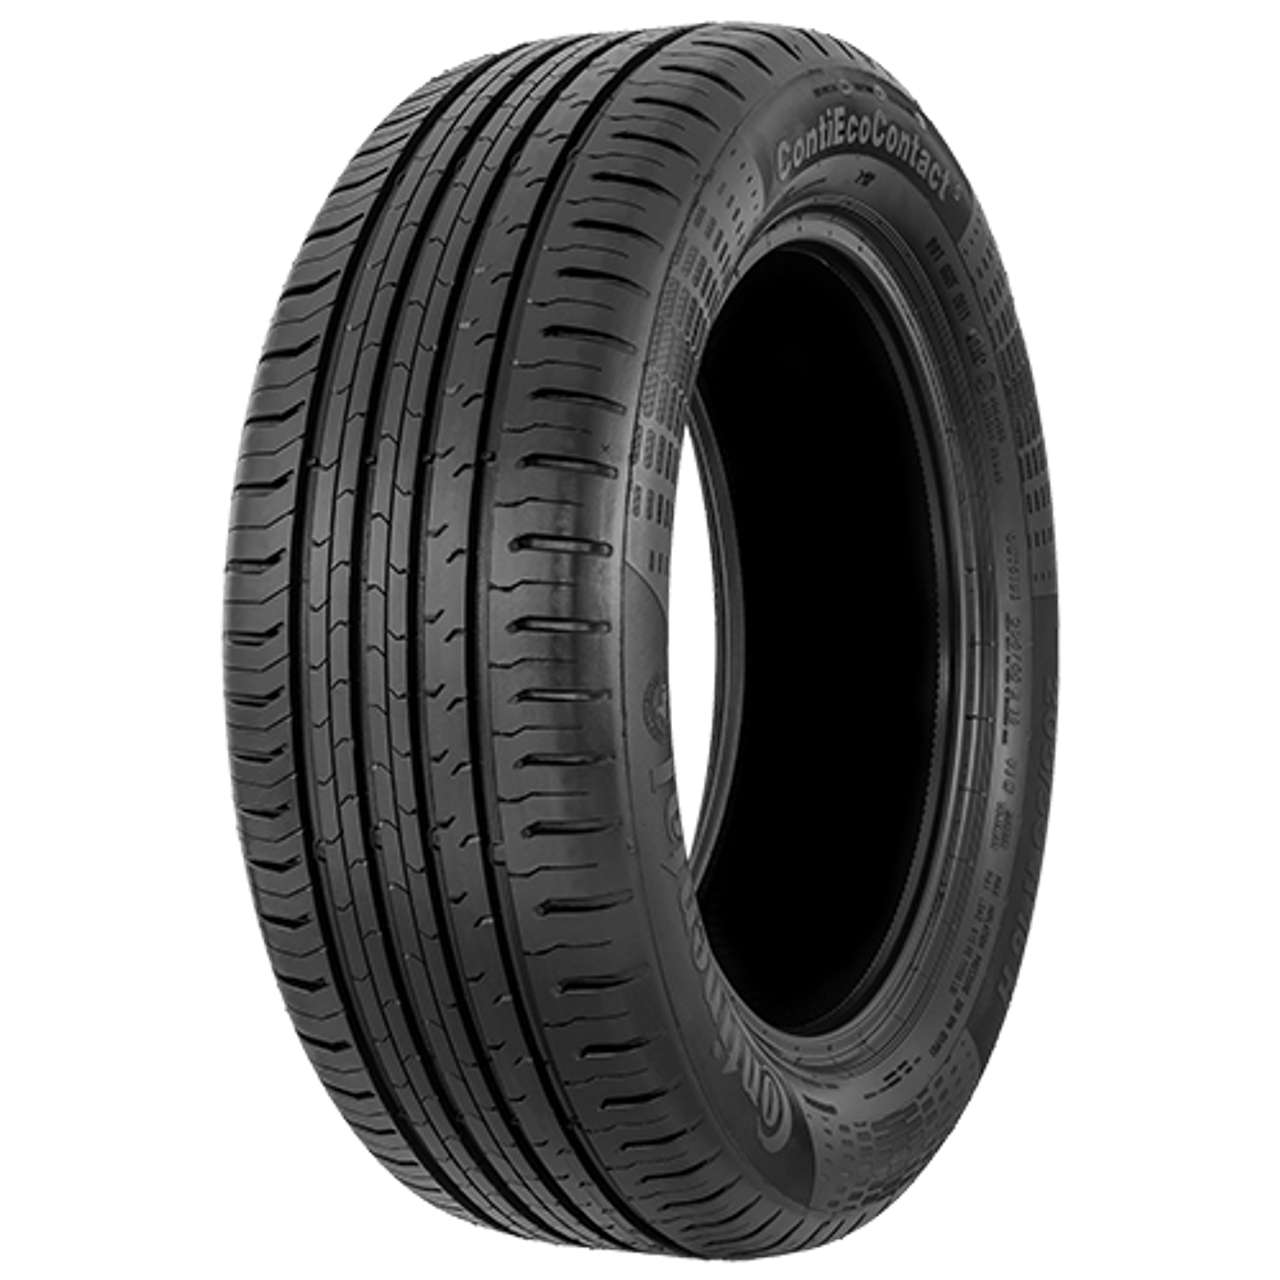 CONTINENTAL CONTIECOCONTACT 5 (MO) 205/55R17 91W